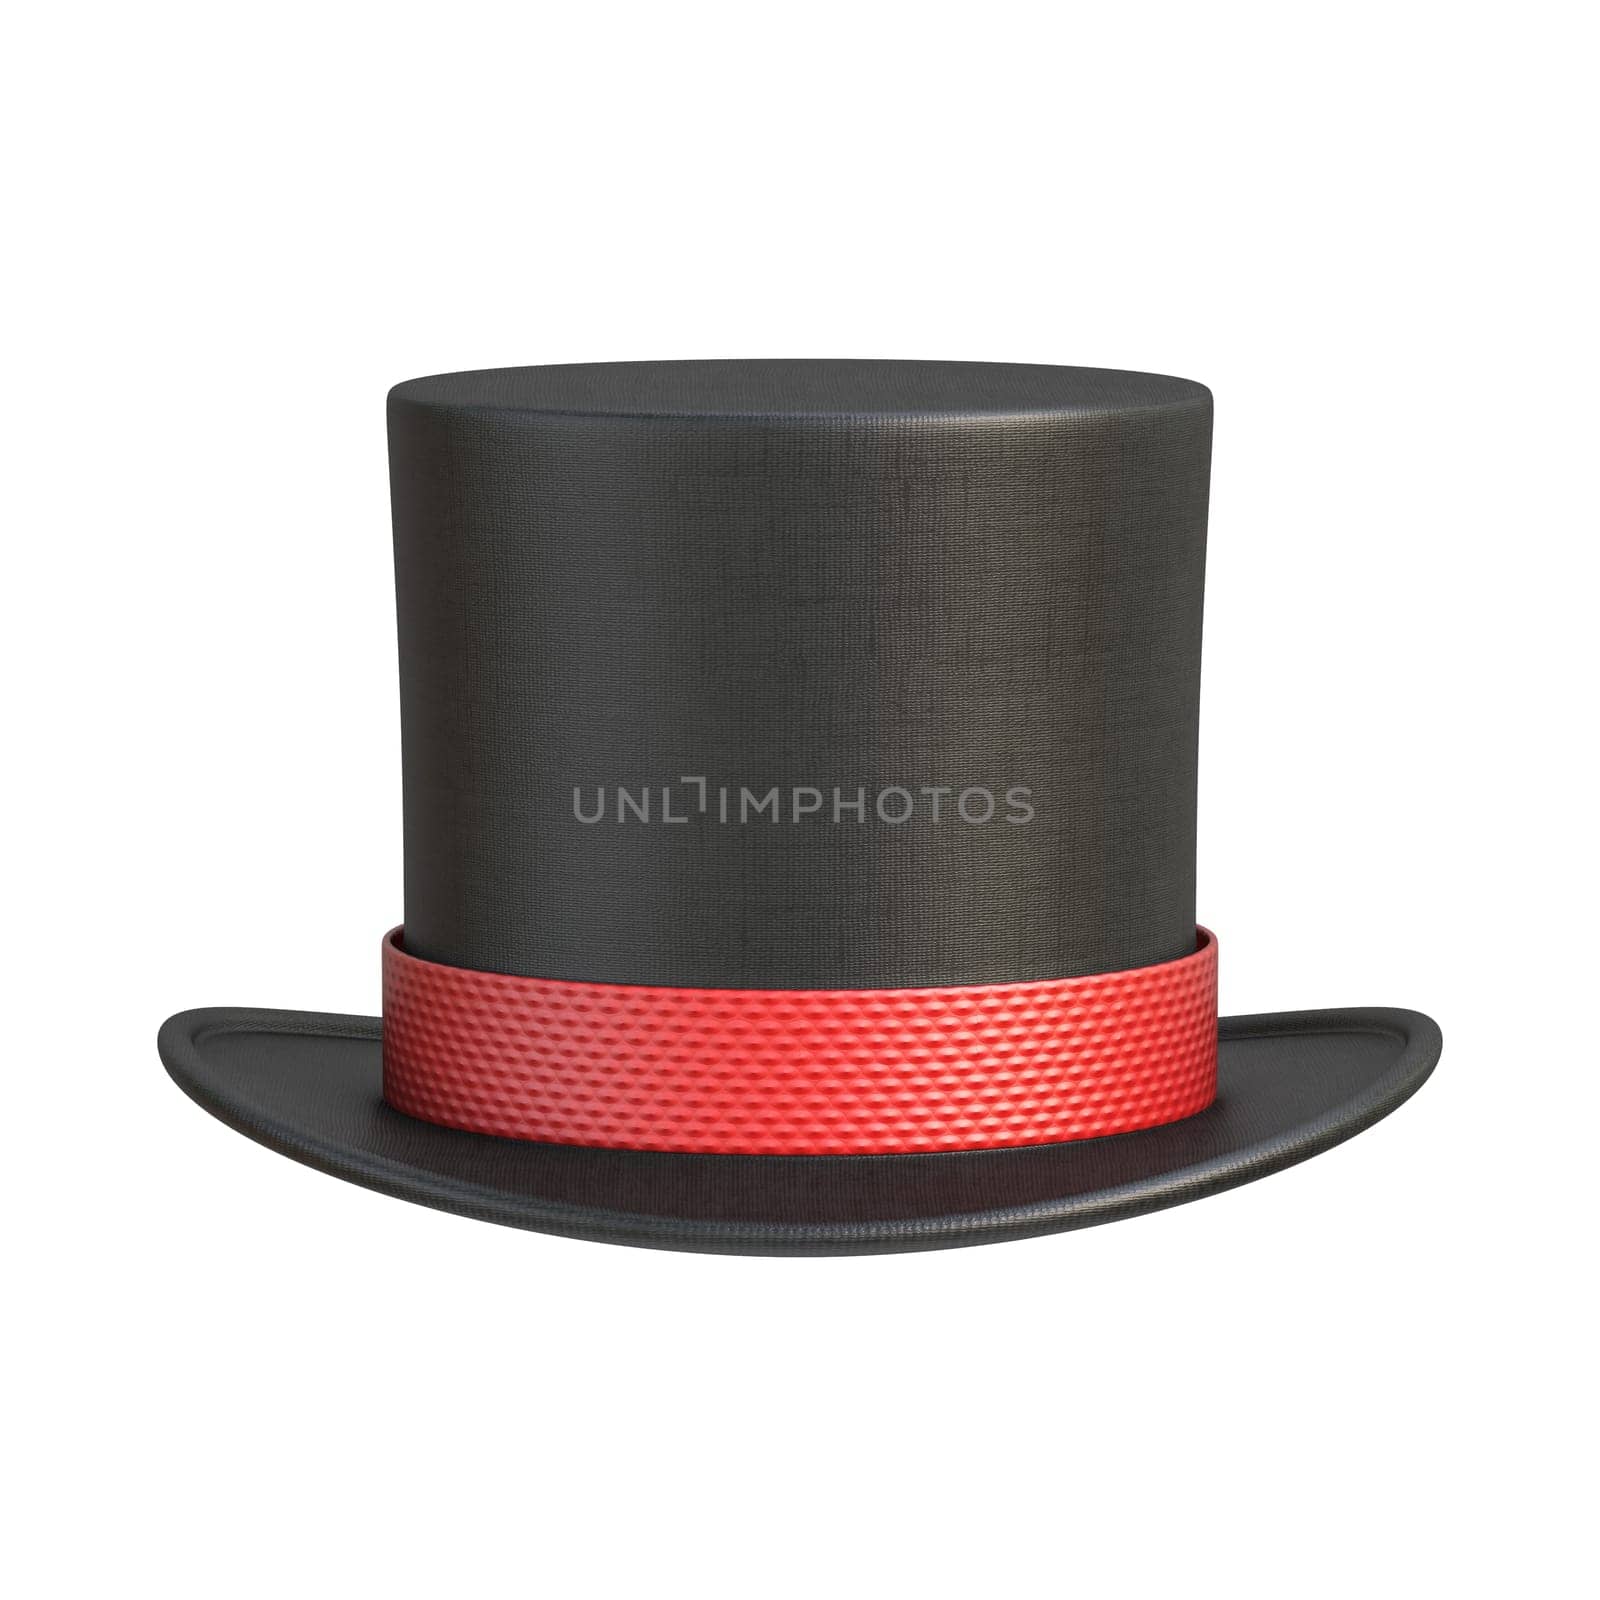 Magic hat 3D rendering illustration isolated on white background